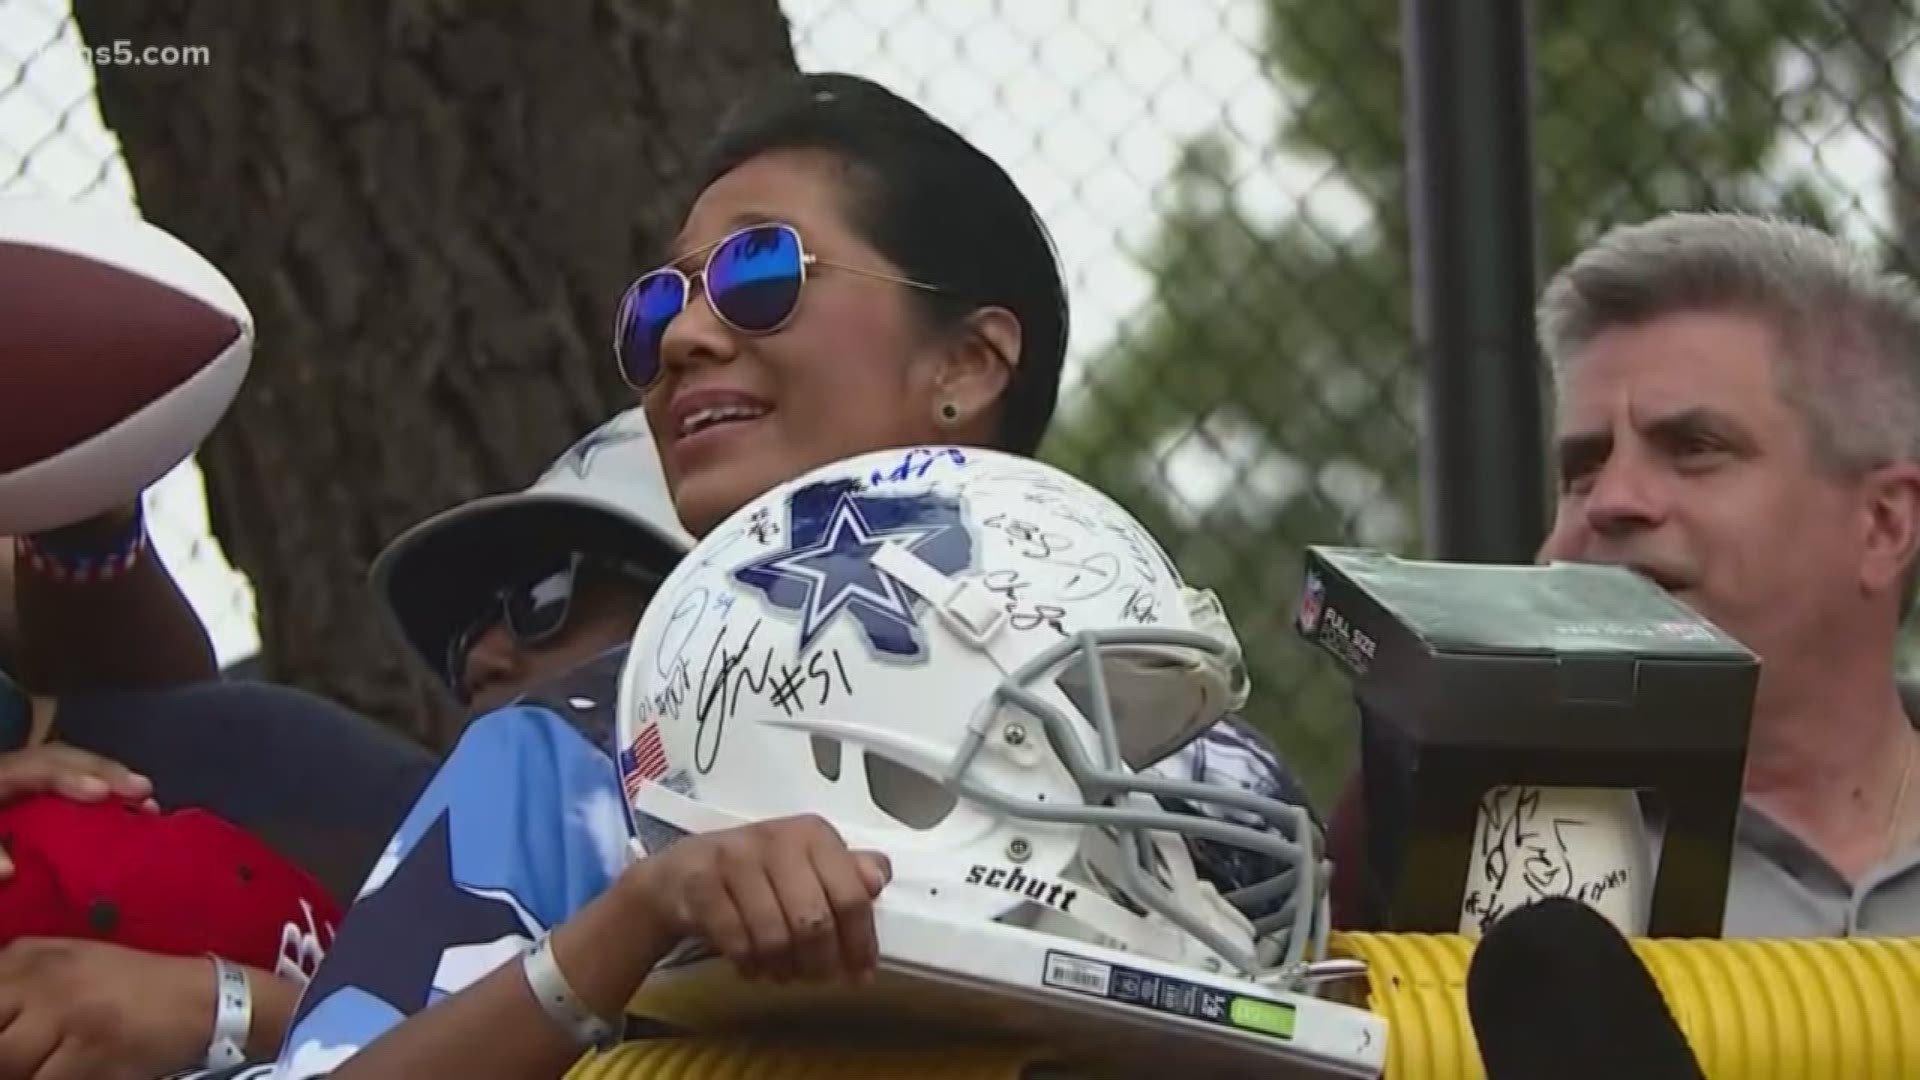 After years of attending Cowboys training camp in Oxnard, superfan Elizabeth Frausto has a priceless collection unlike any other.